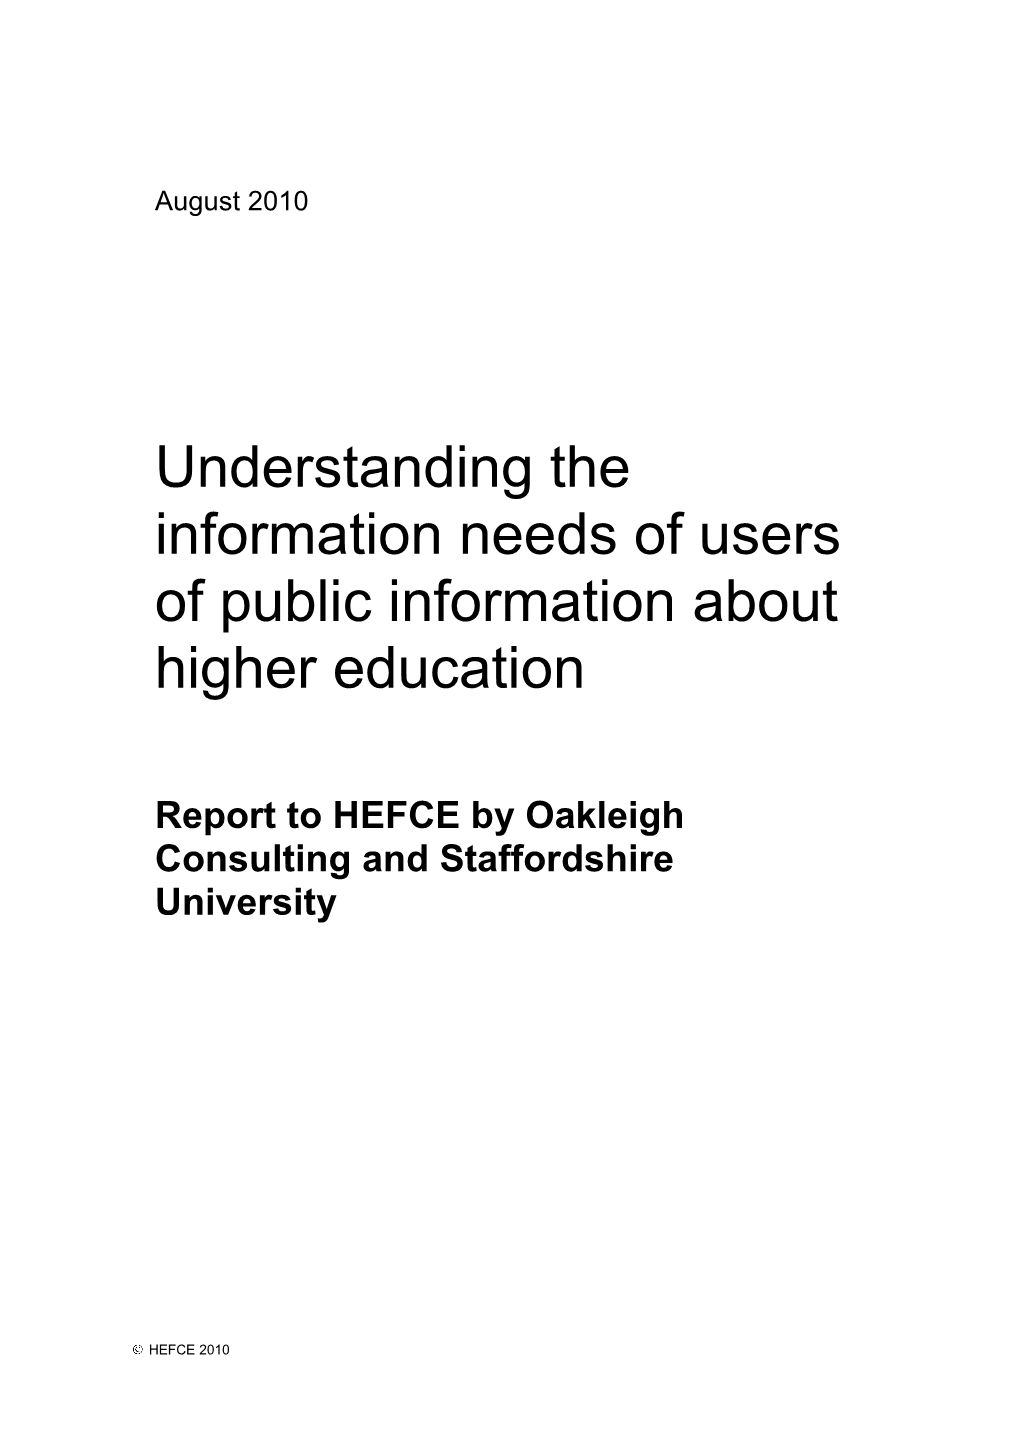 Understanding the Information Needs of Users of Public Information About Higher Education